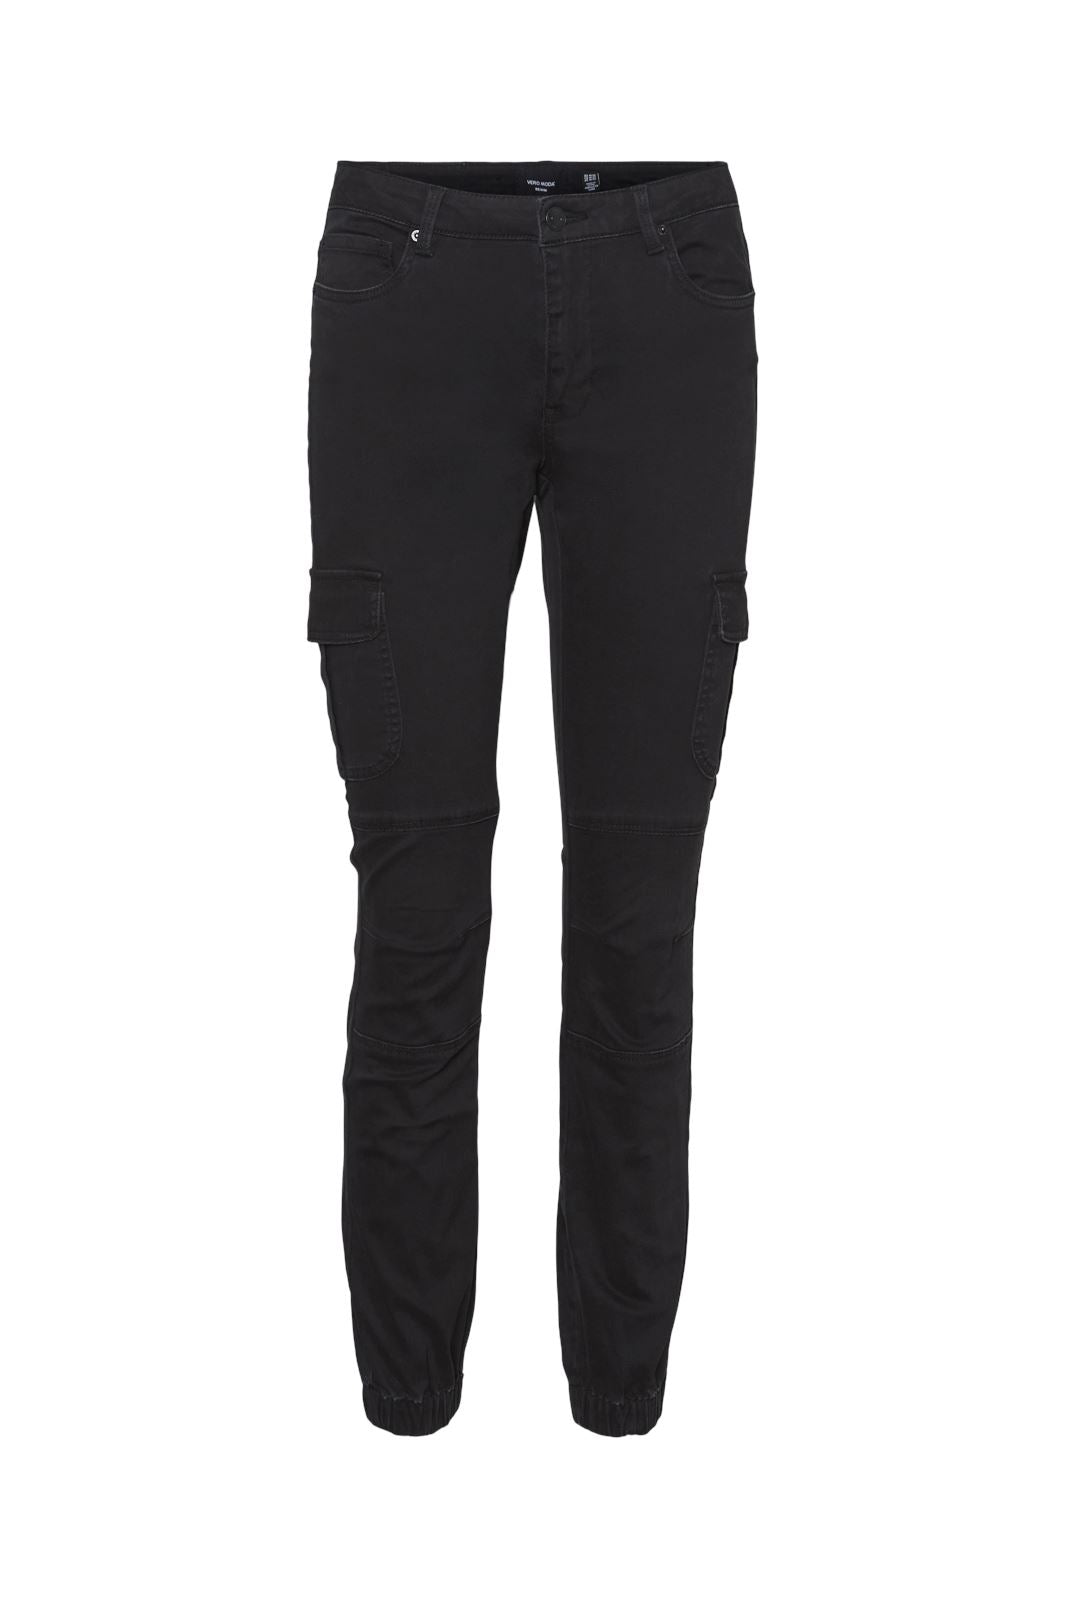 Vero Moda - Vmivy Mr Ankle Cargo Pants - 4273898 Black Washed